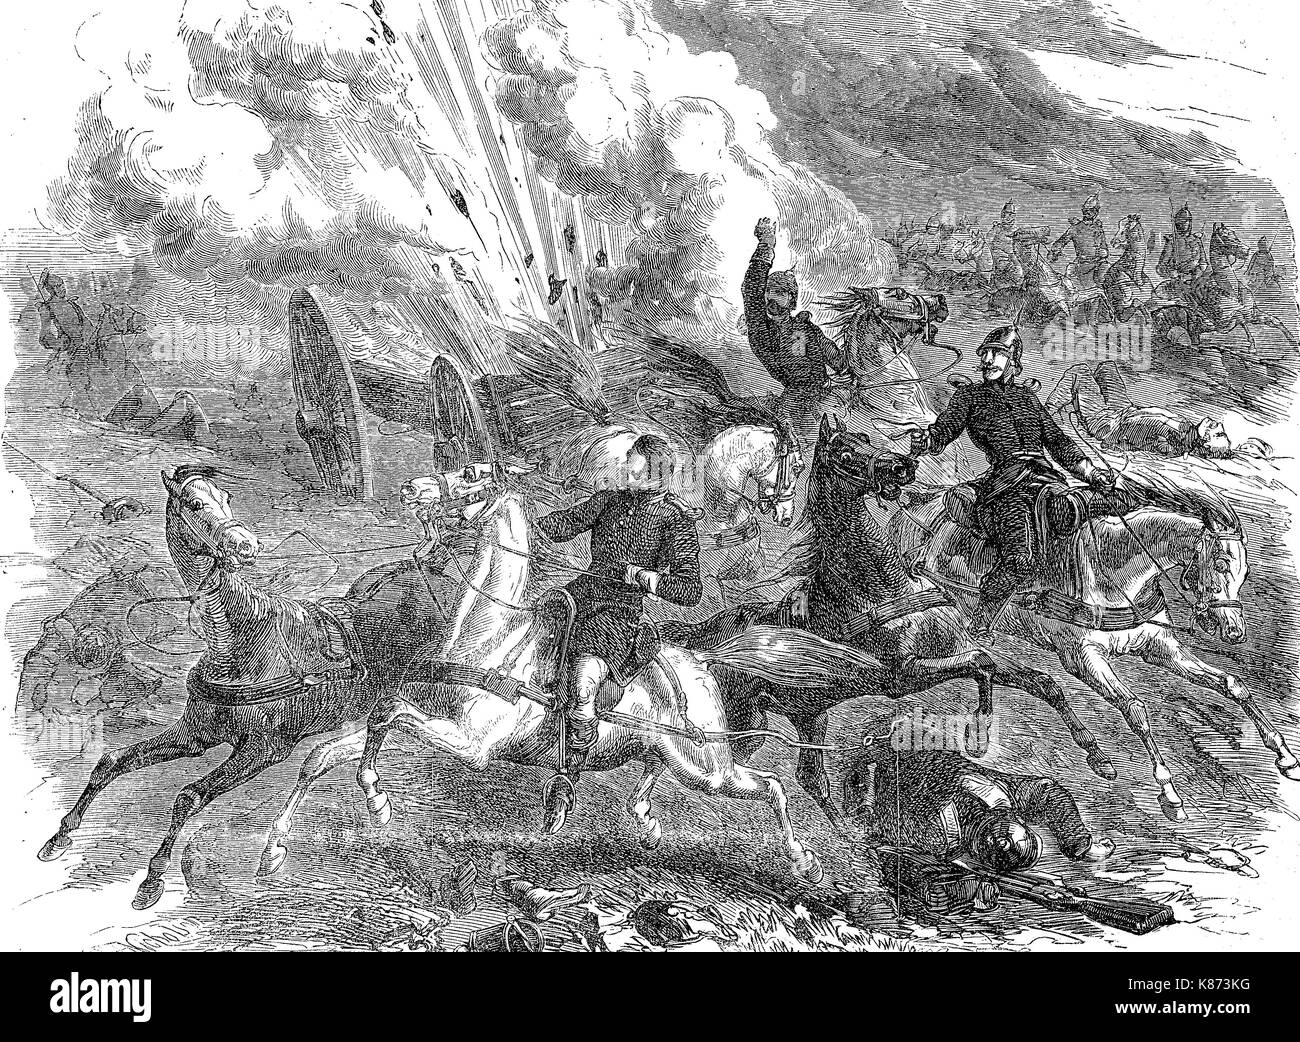 Crimean War, 1855, explosion of a Russian powder cart, Digital improved reproduction of an original woodprint from the 19th century Stock Photo